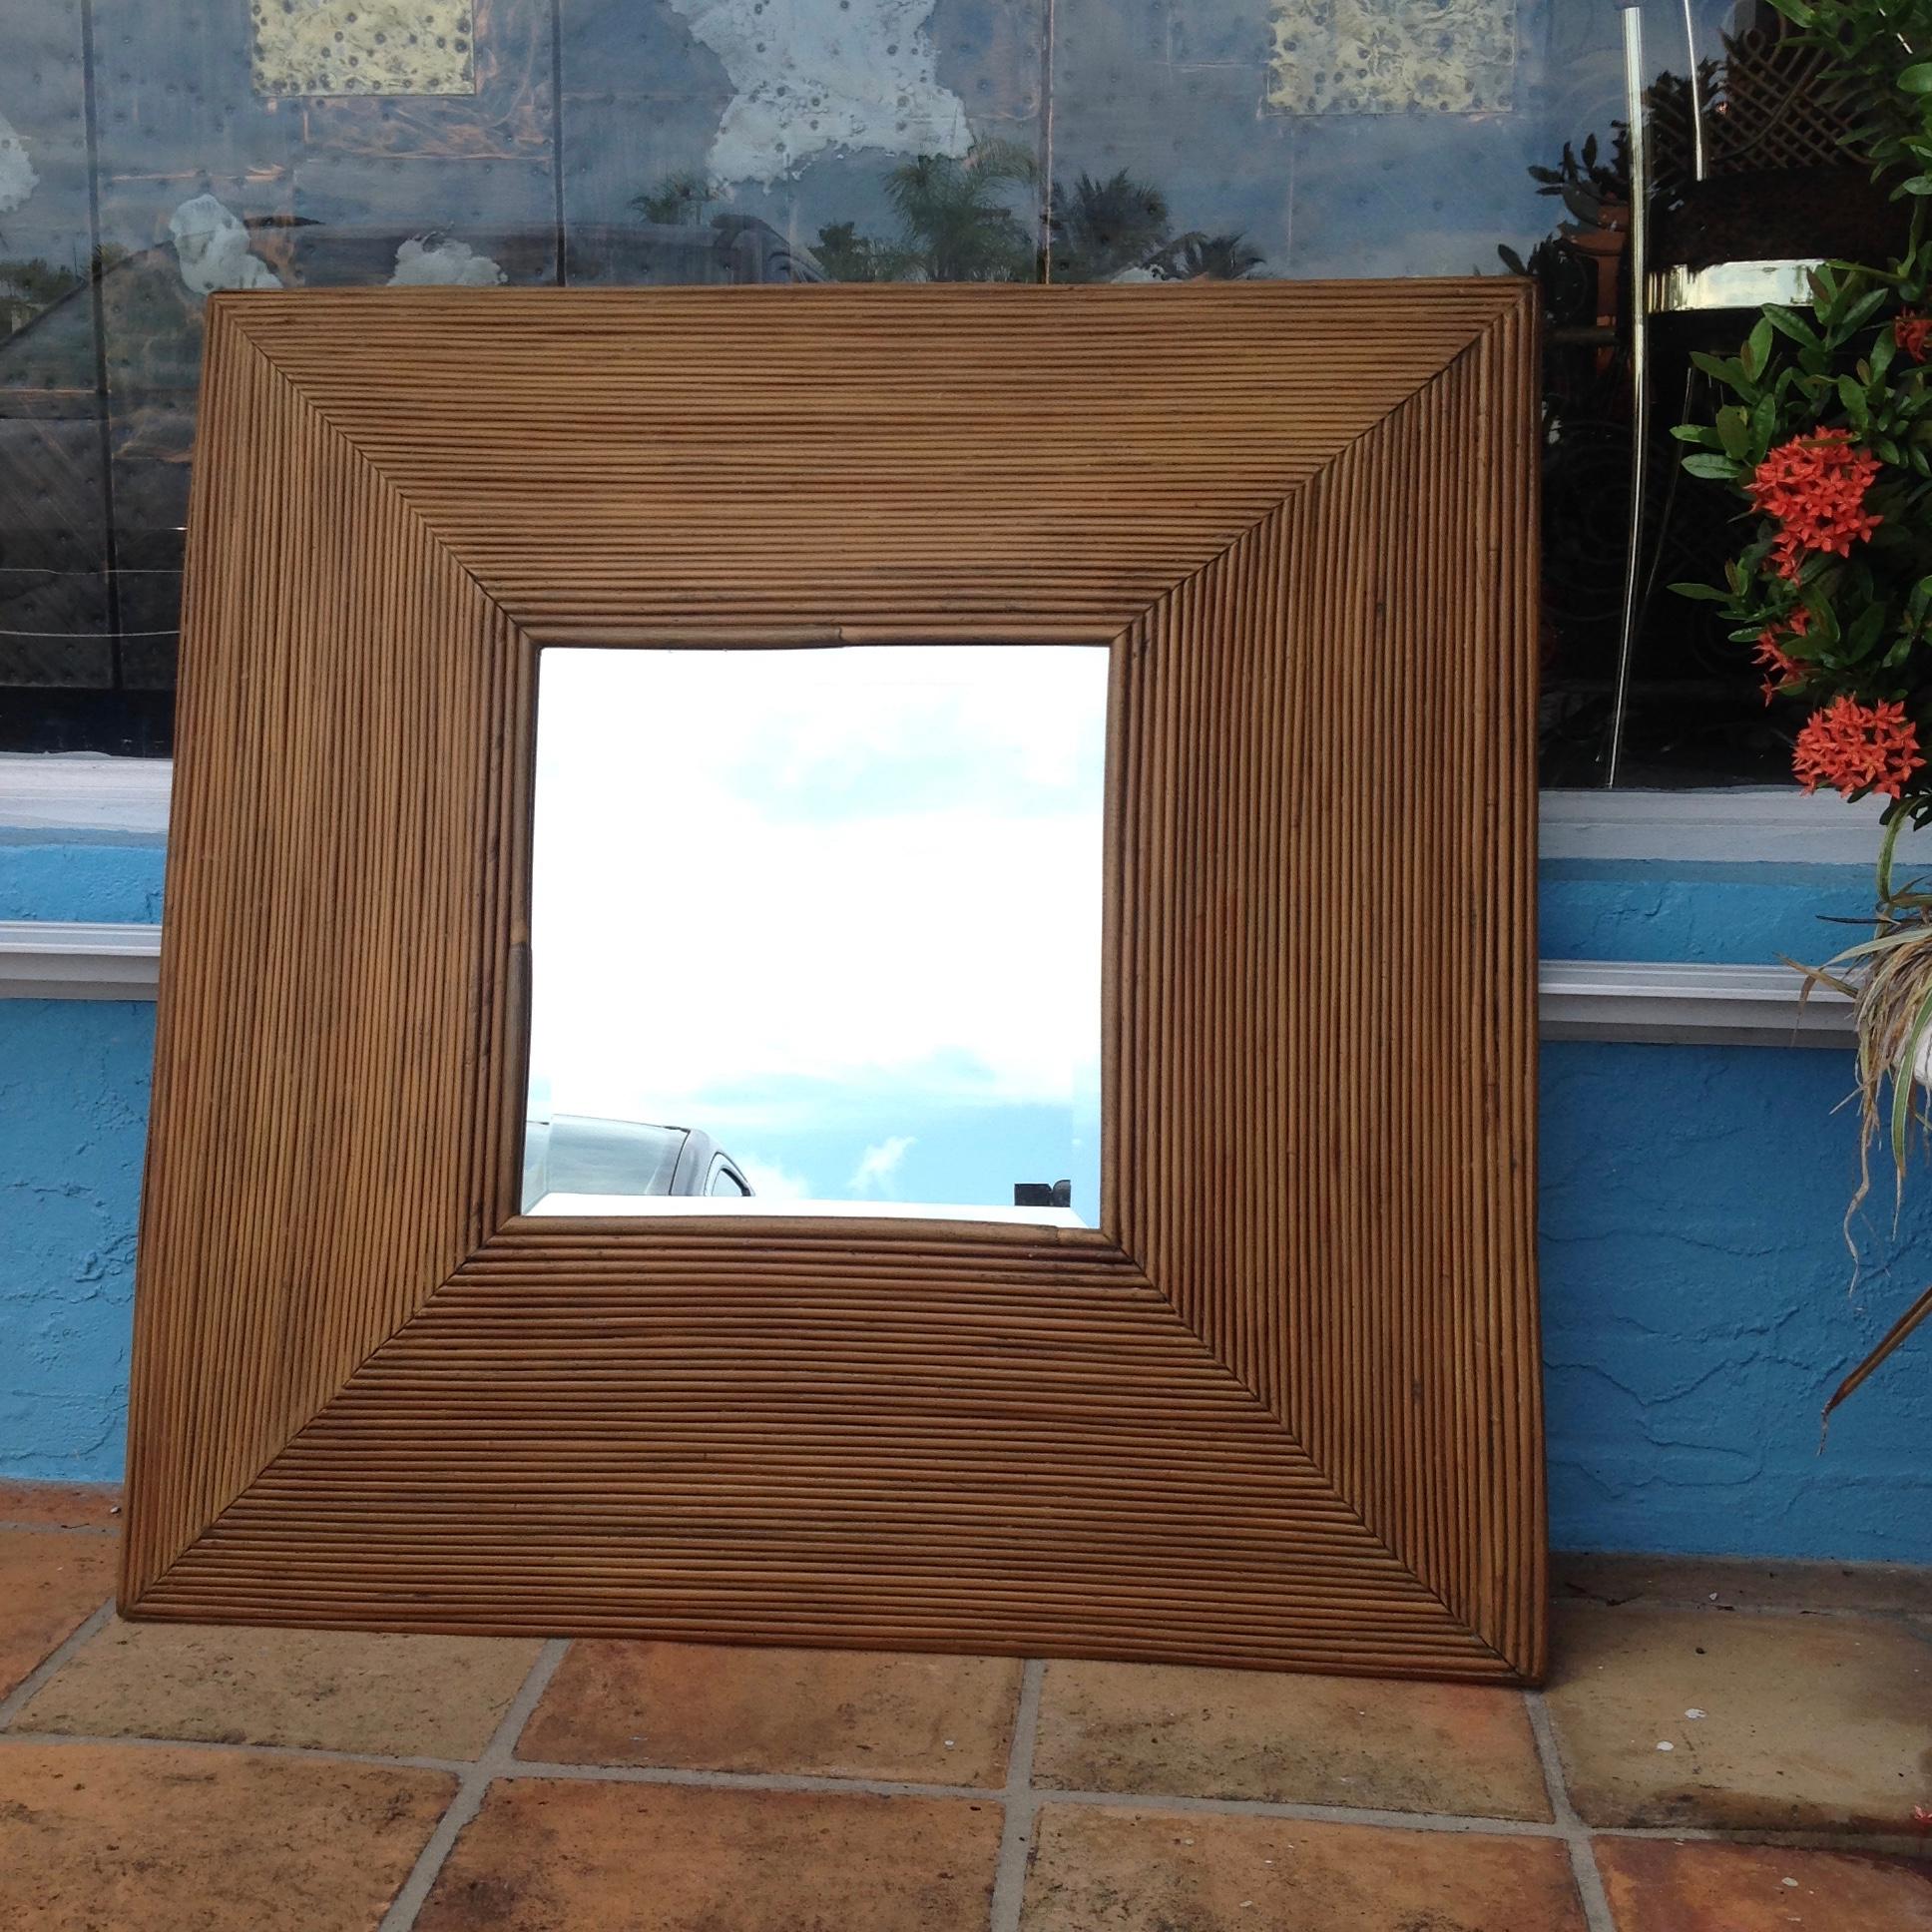 Dramatic design with flared out sides. The deep beveled mirror is original.